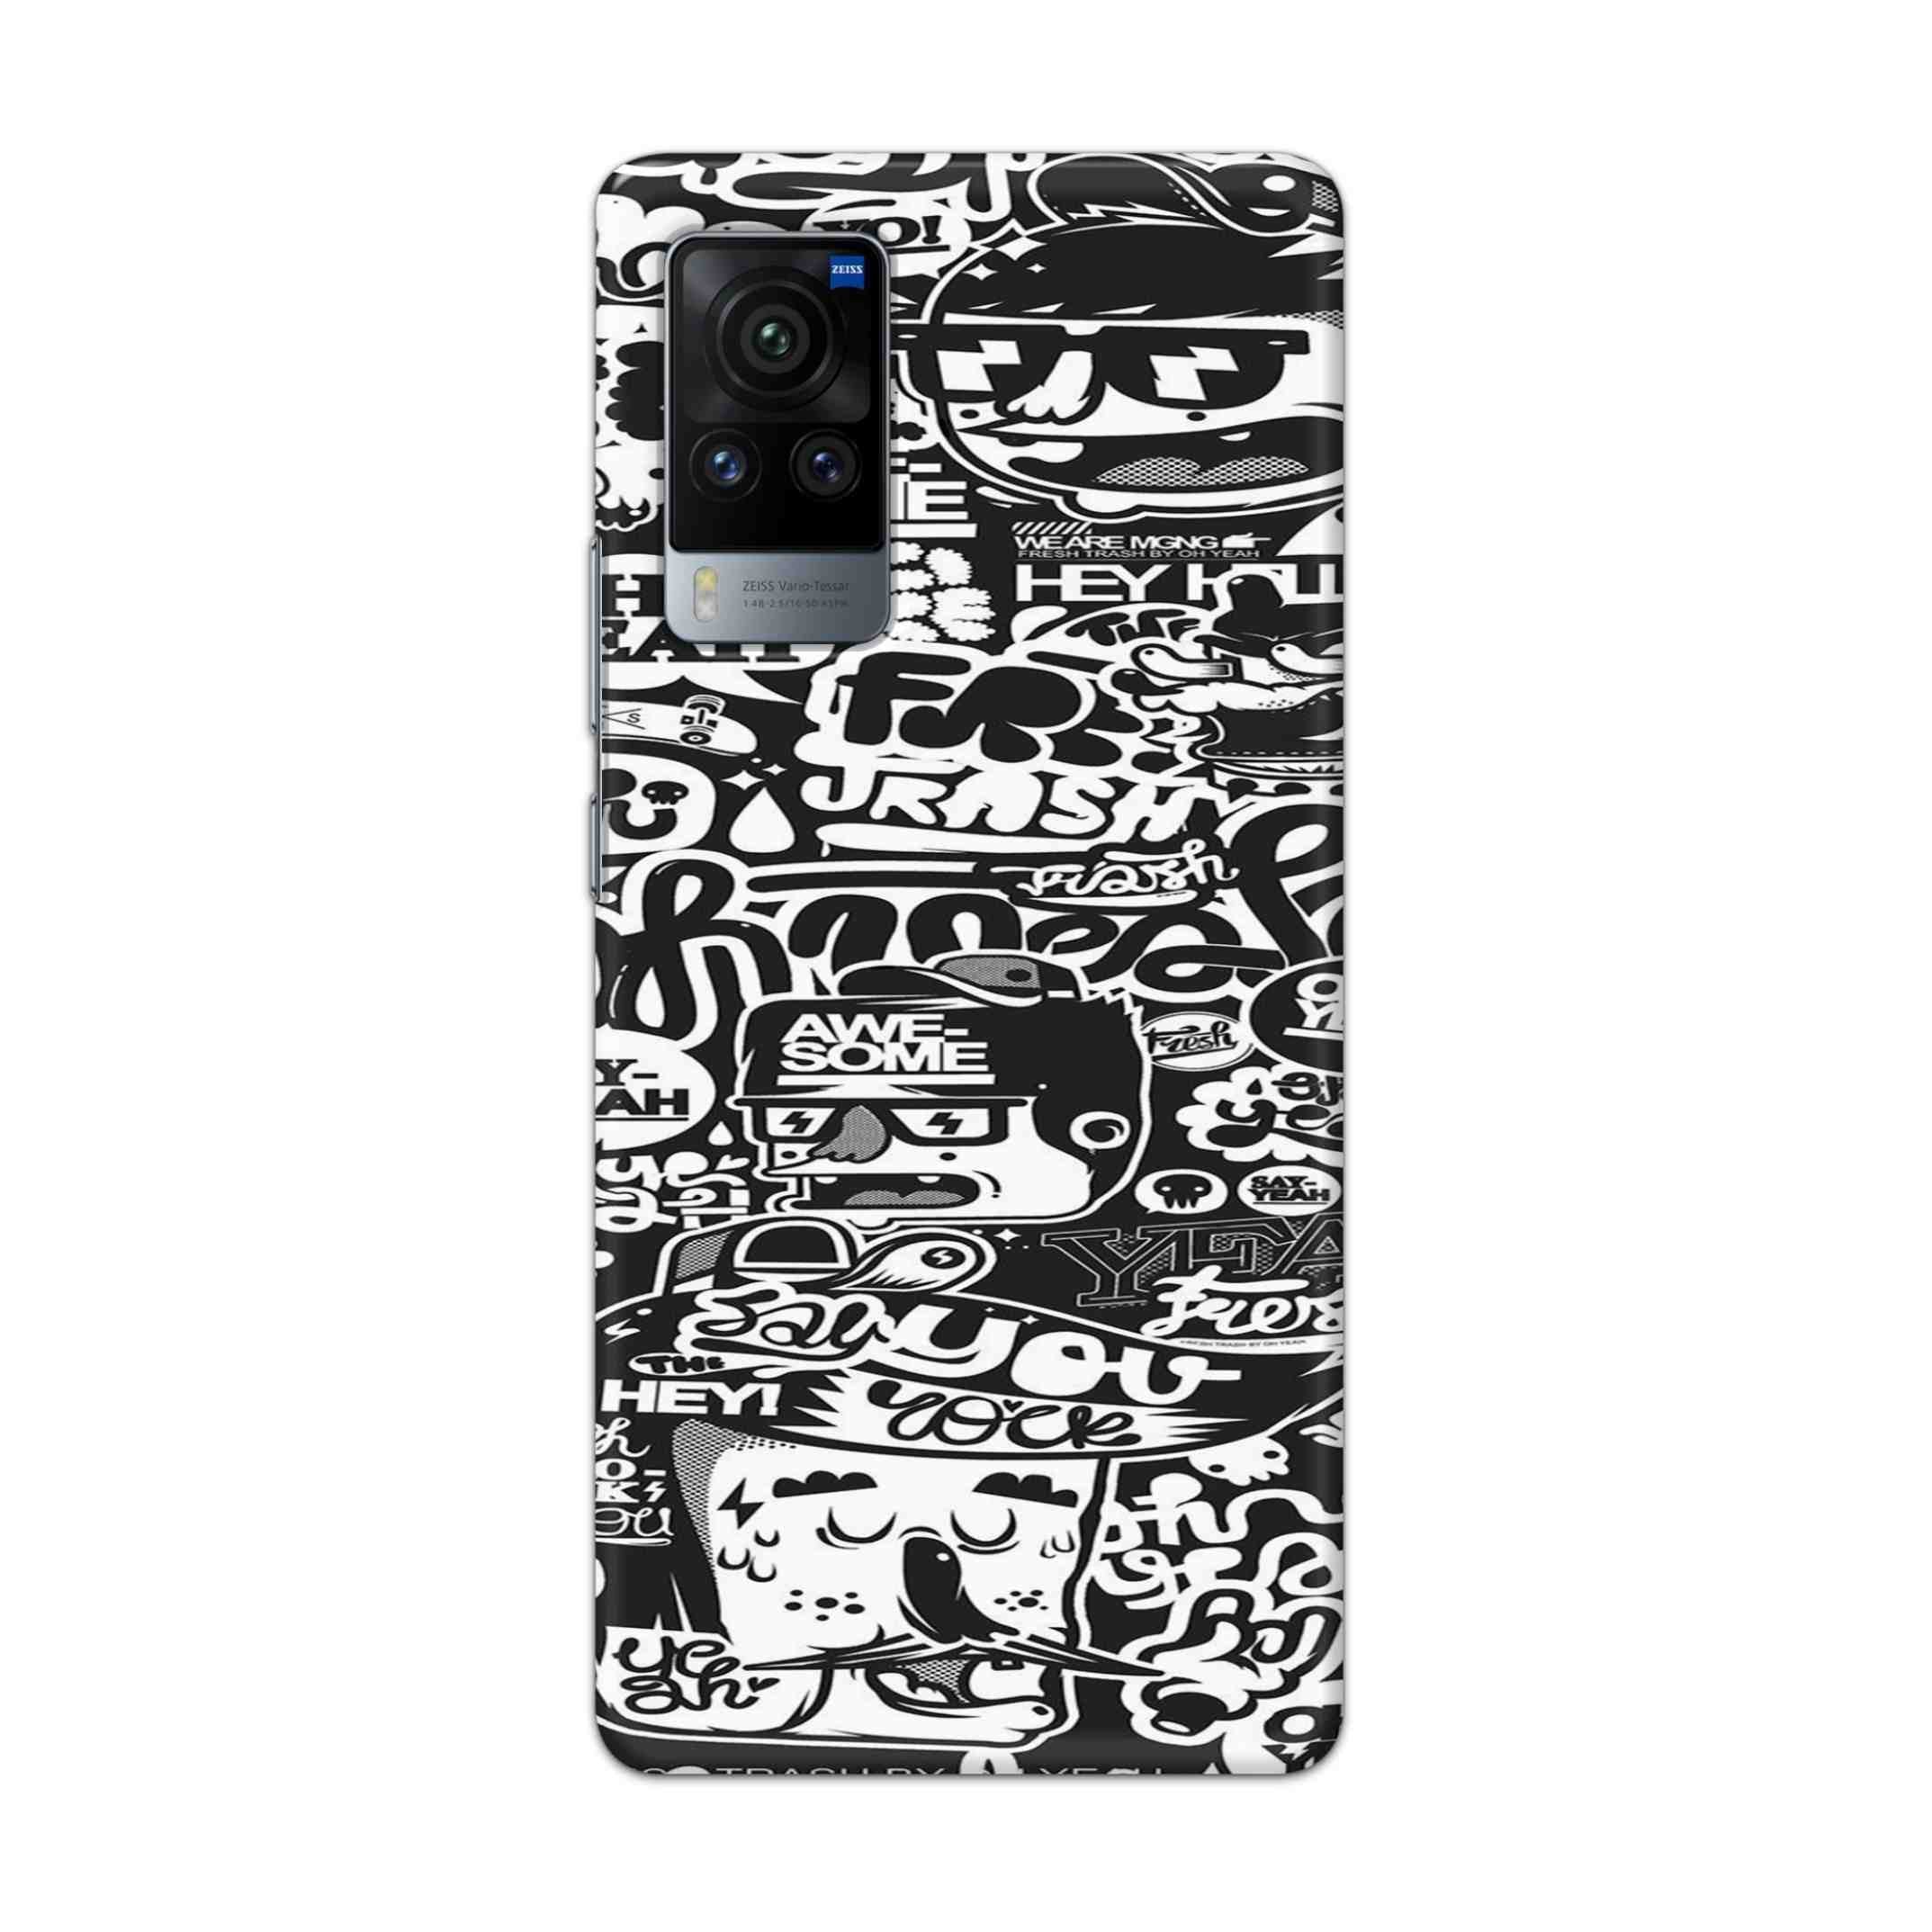 Buy Awesome Hard Back Mobile Phone Case Cover For Vivo X60 Pro Online